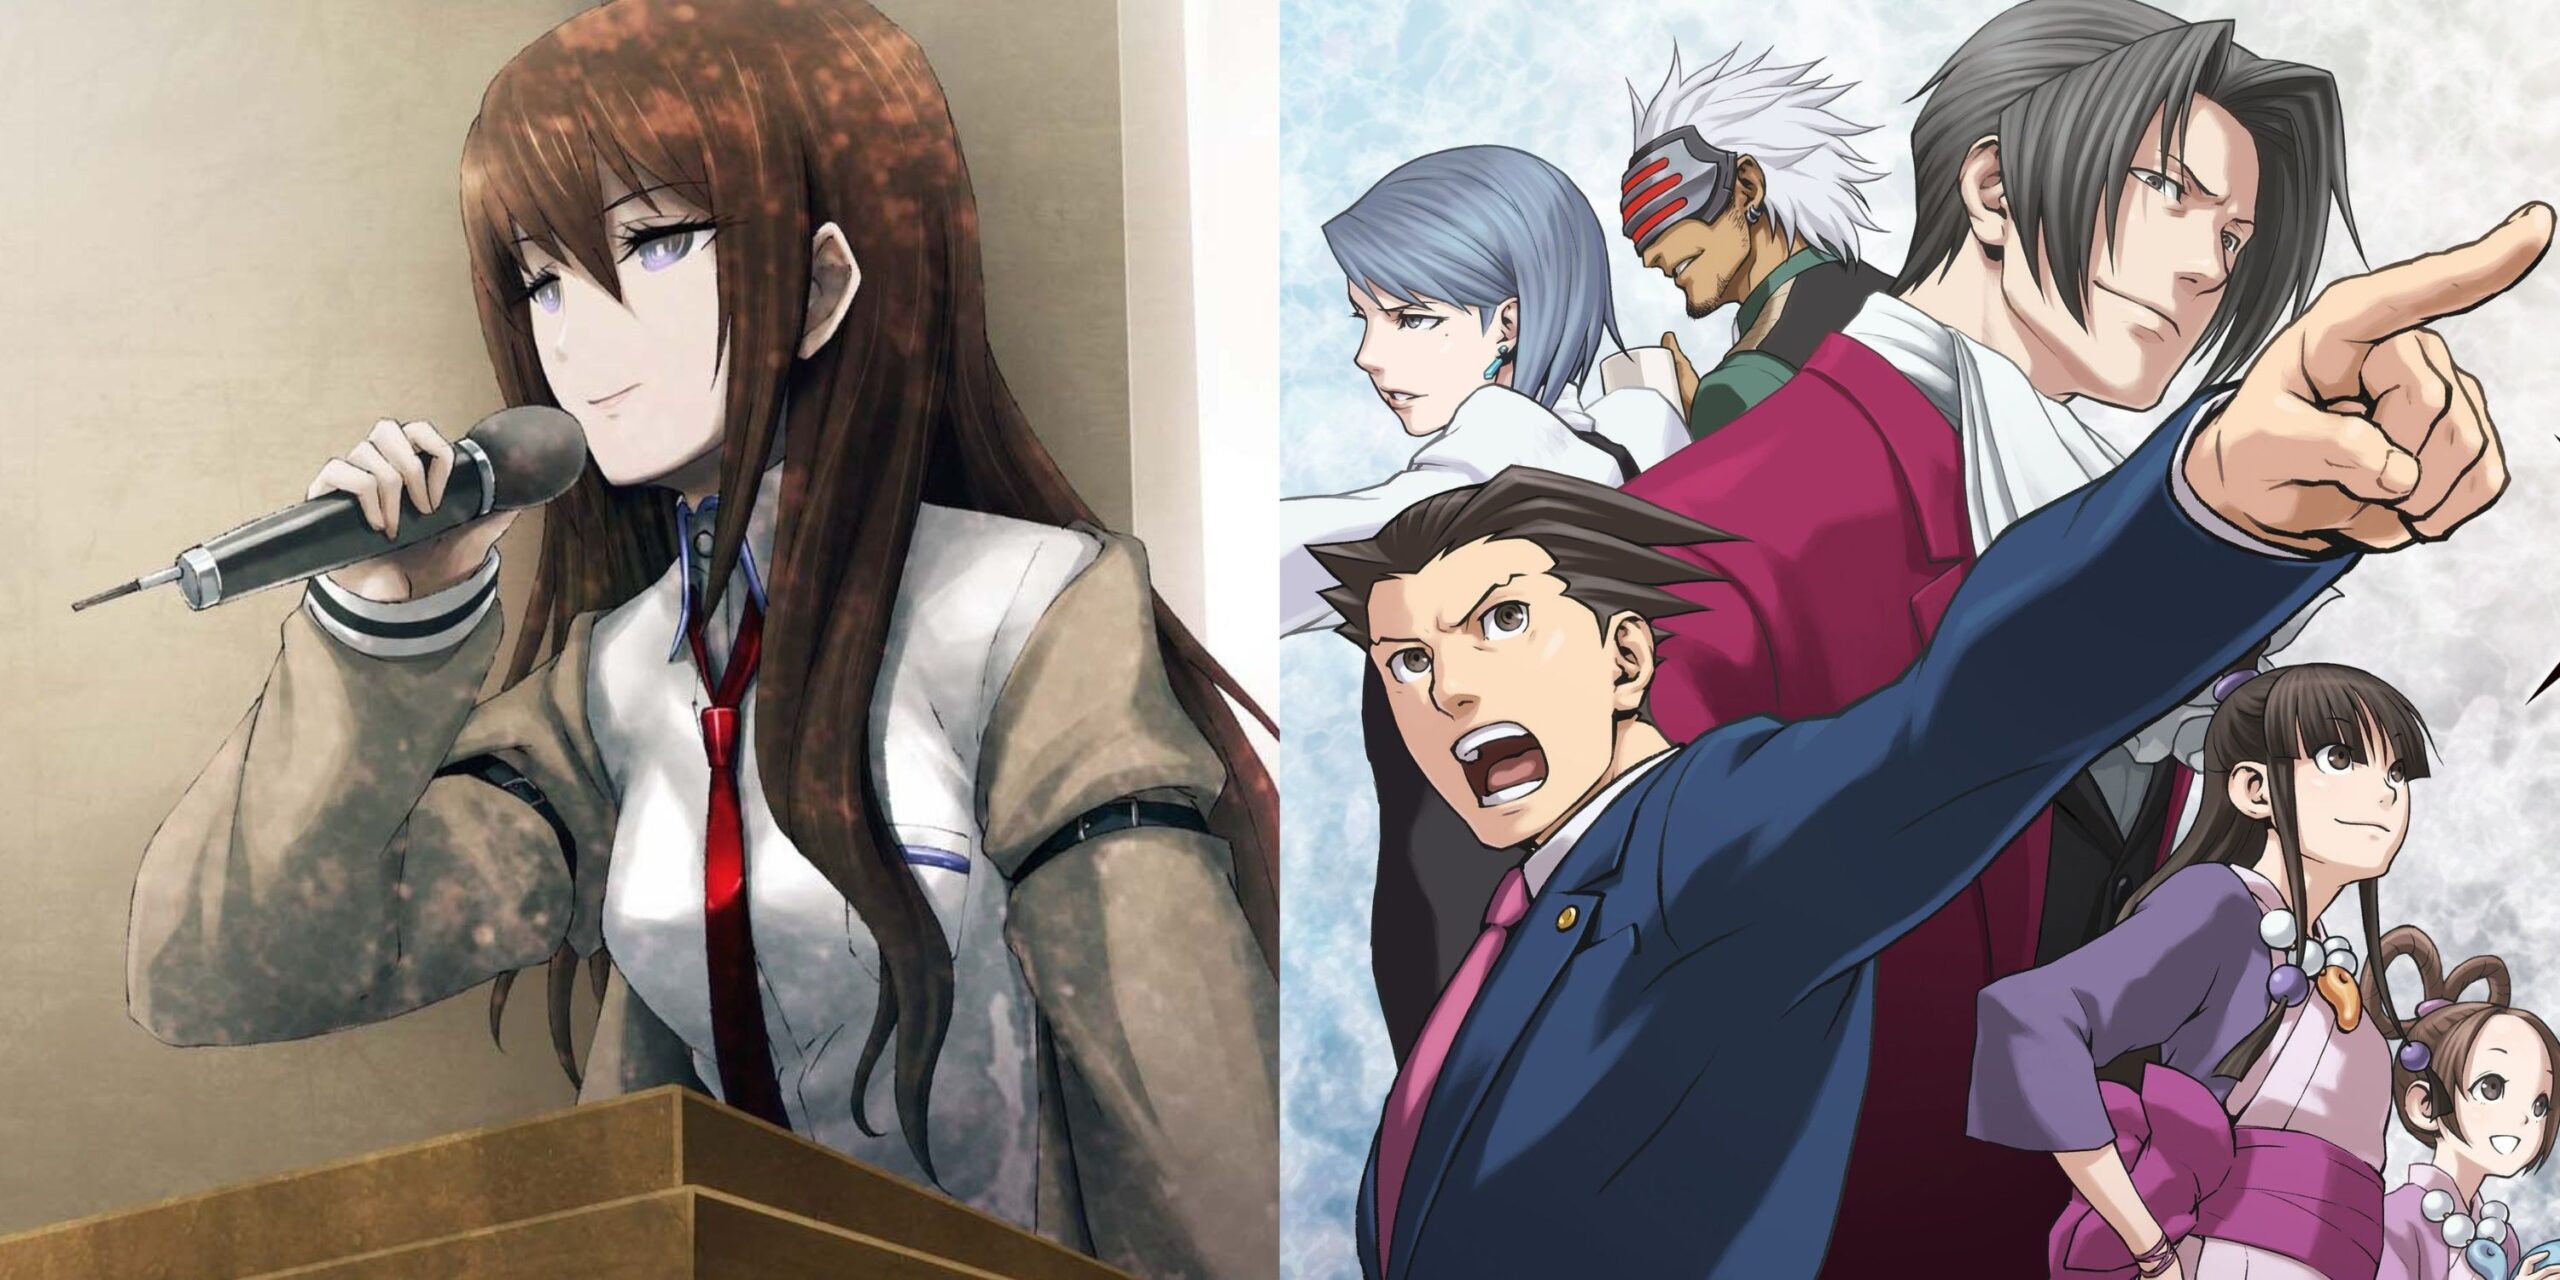 Featured image Makise Kurisu speaks into a microphone in the Steins Gate visual novel and Phoenix Wright trilogy cover art